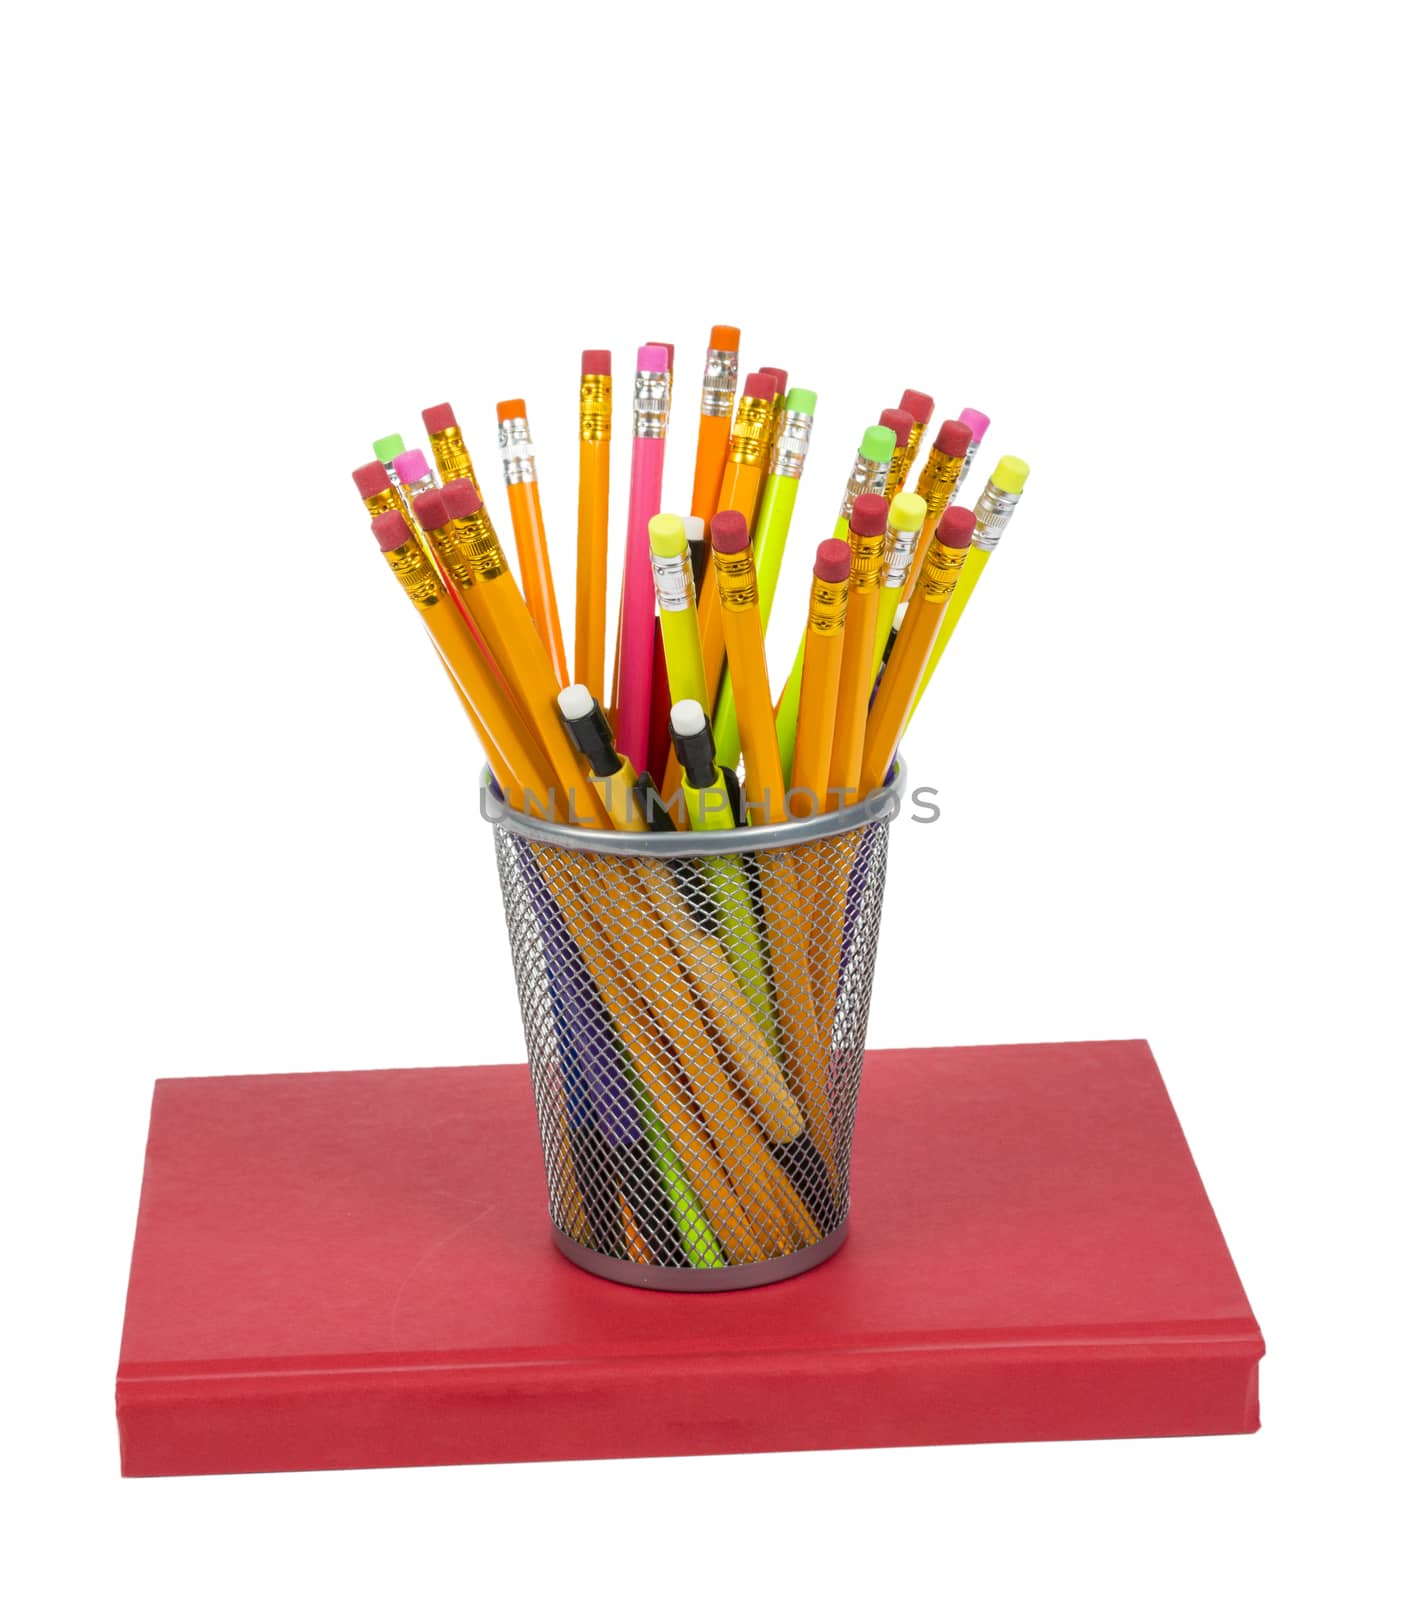 Isolated on white shot of a bunch of colorful pencils in a holder resting on a red book.